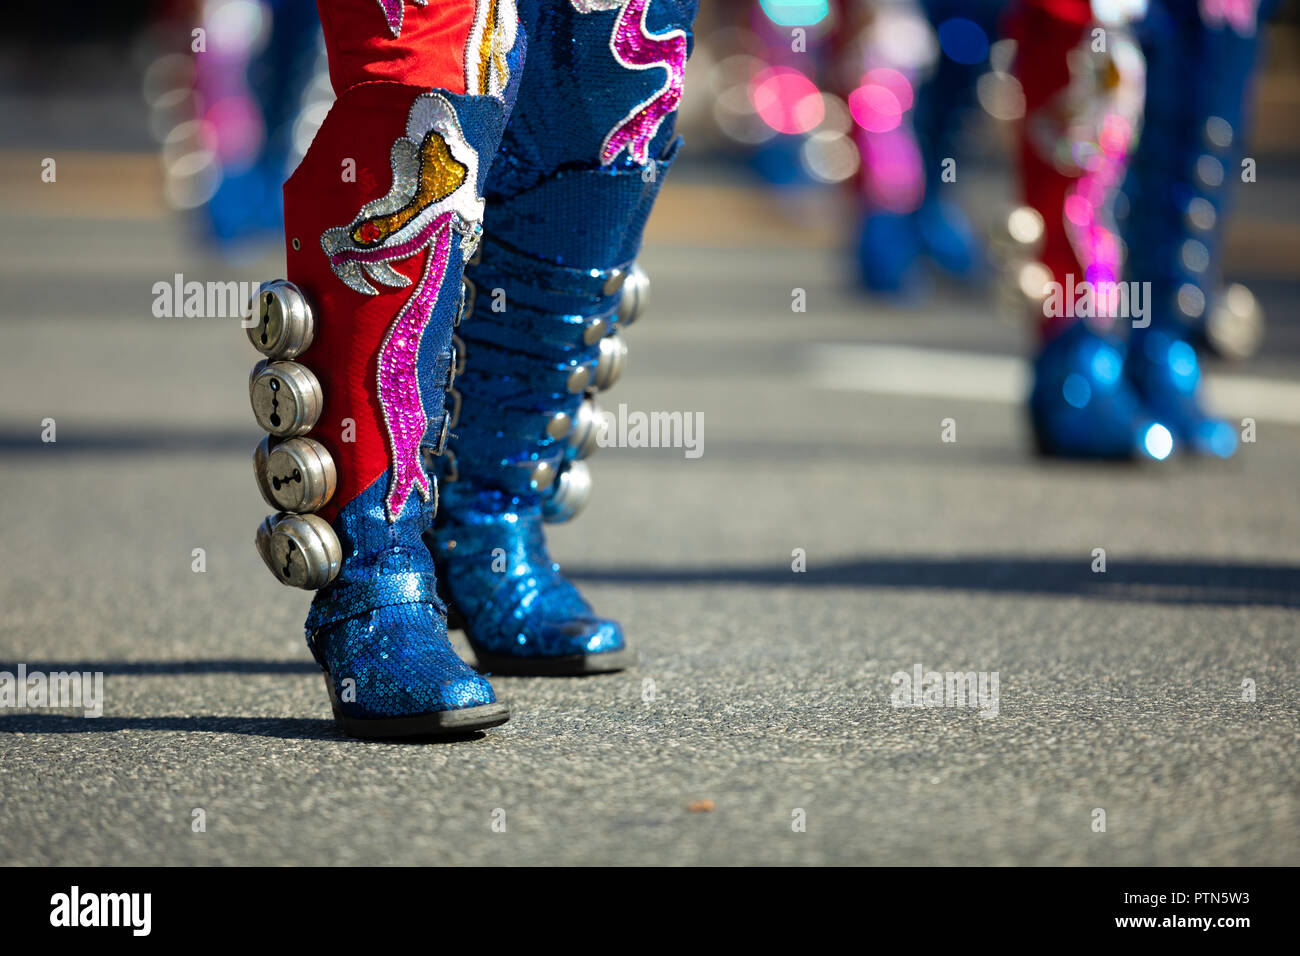 Washington, D.C., USA - September 29, 2018: The Fiesta DC Parade, Bolivian men wearing traditional clothing performing a traditional Bolivian dance Stock Photo